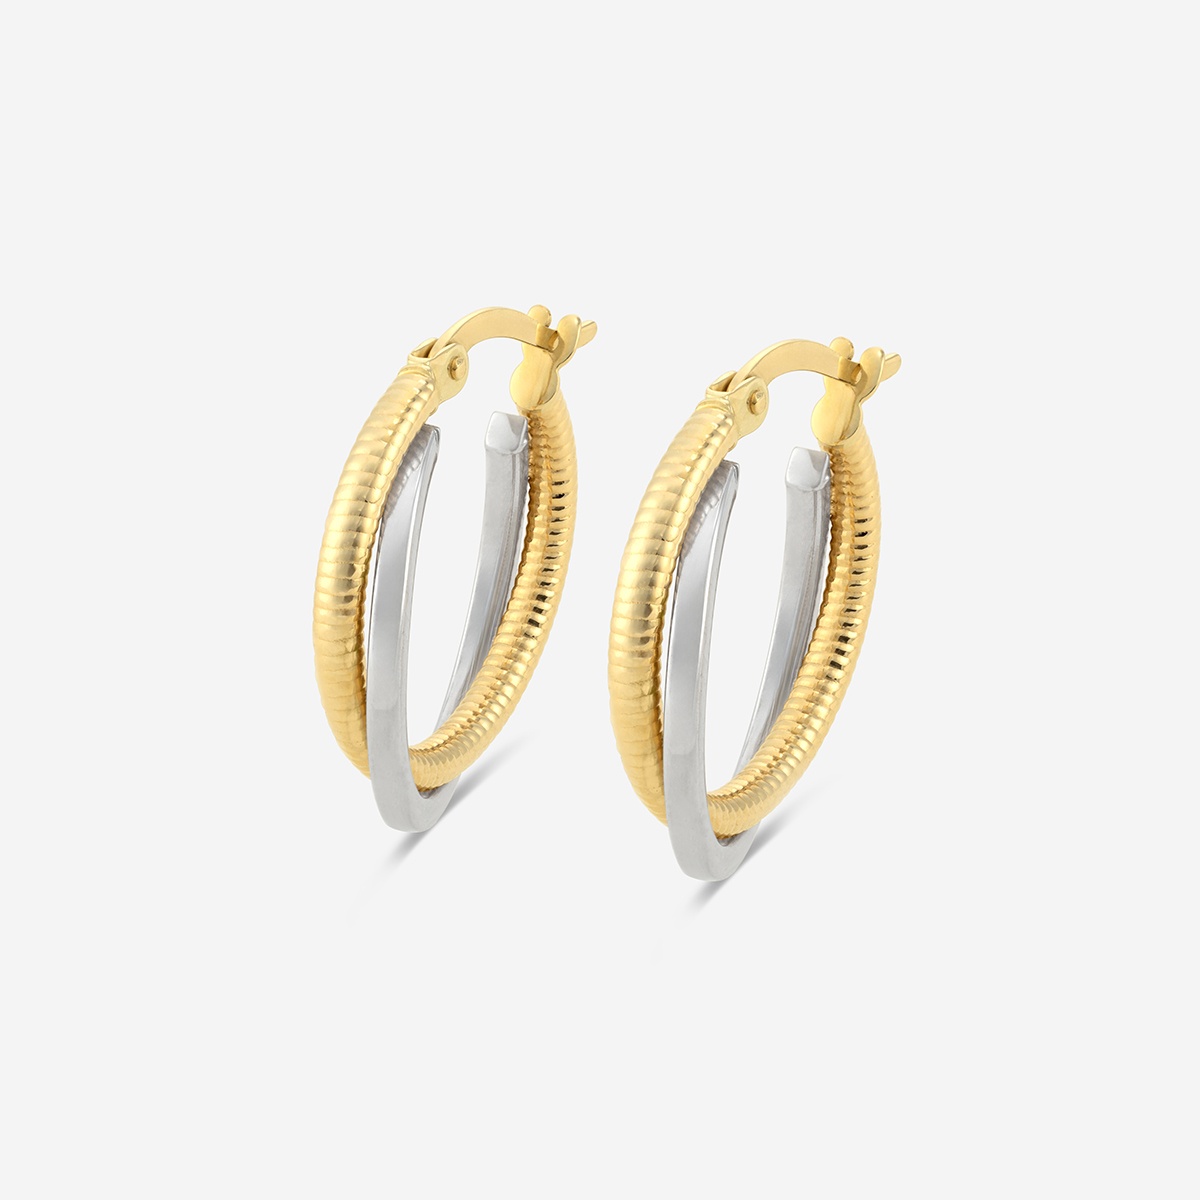 Plain and Textured Two Color Intertwined Hoop Earrings - Grownbrilliance